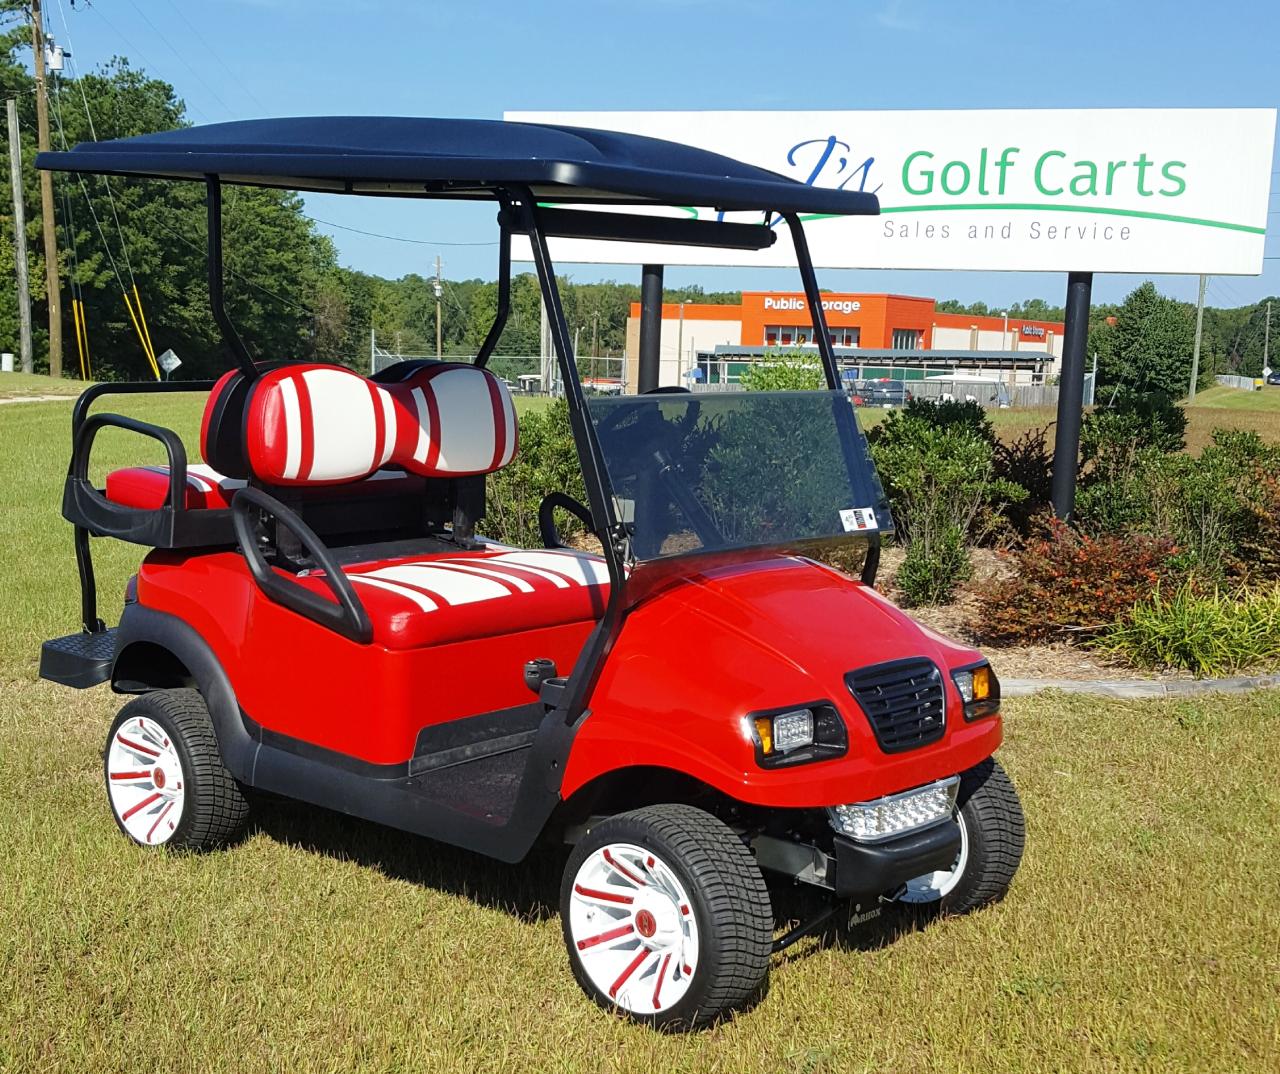 Used Golf Carts for Sale by Owner in Willacy, Texas: Your Ultimate Guide to Affordable and Convenient Transportation